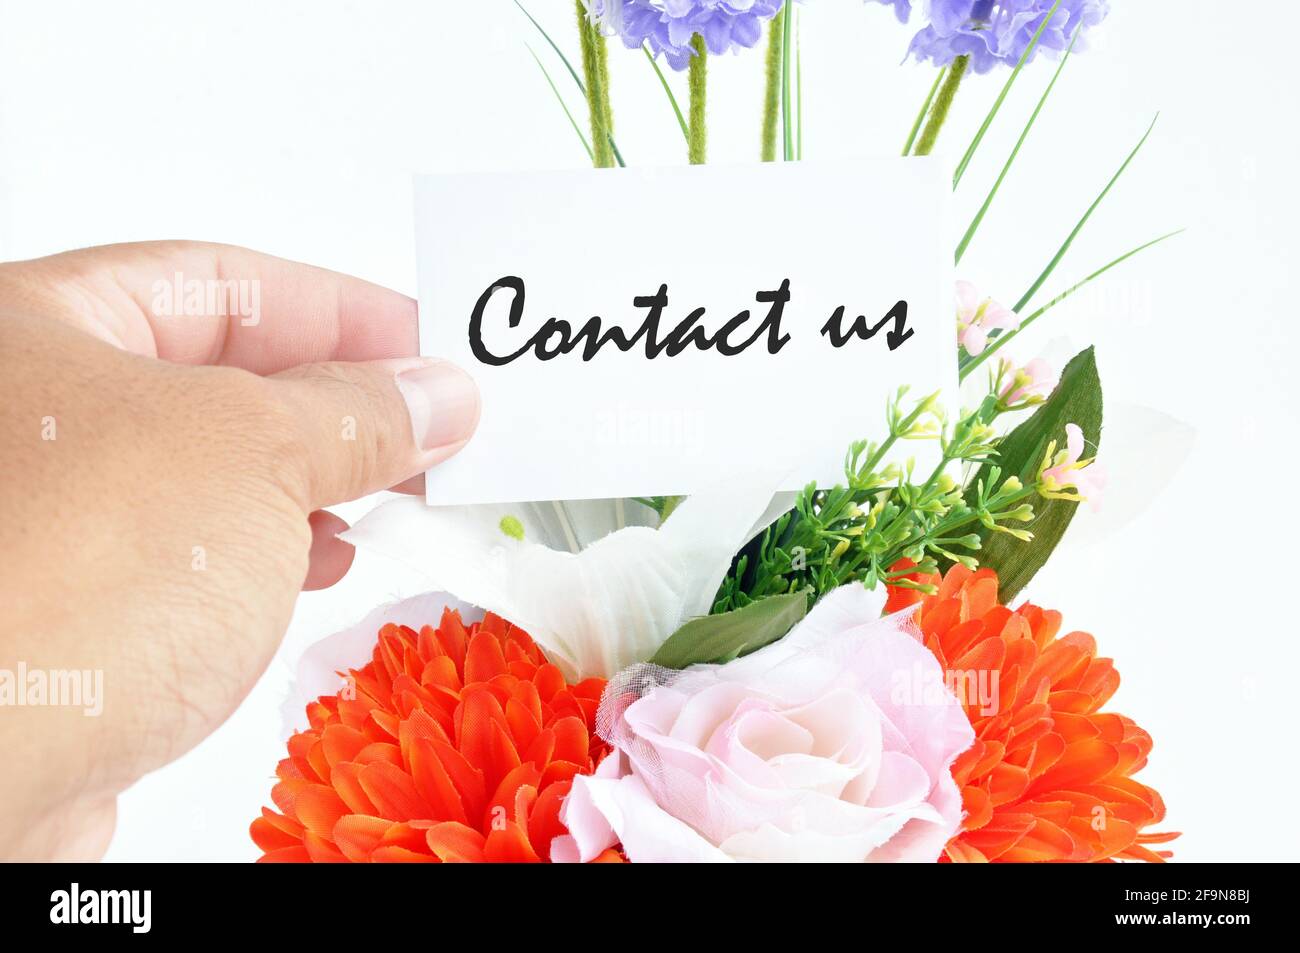 Flower bouquet with ' Contact us ' on tag card Stock Photo